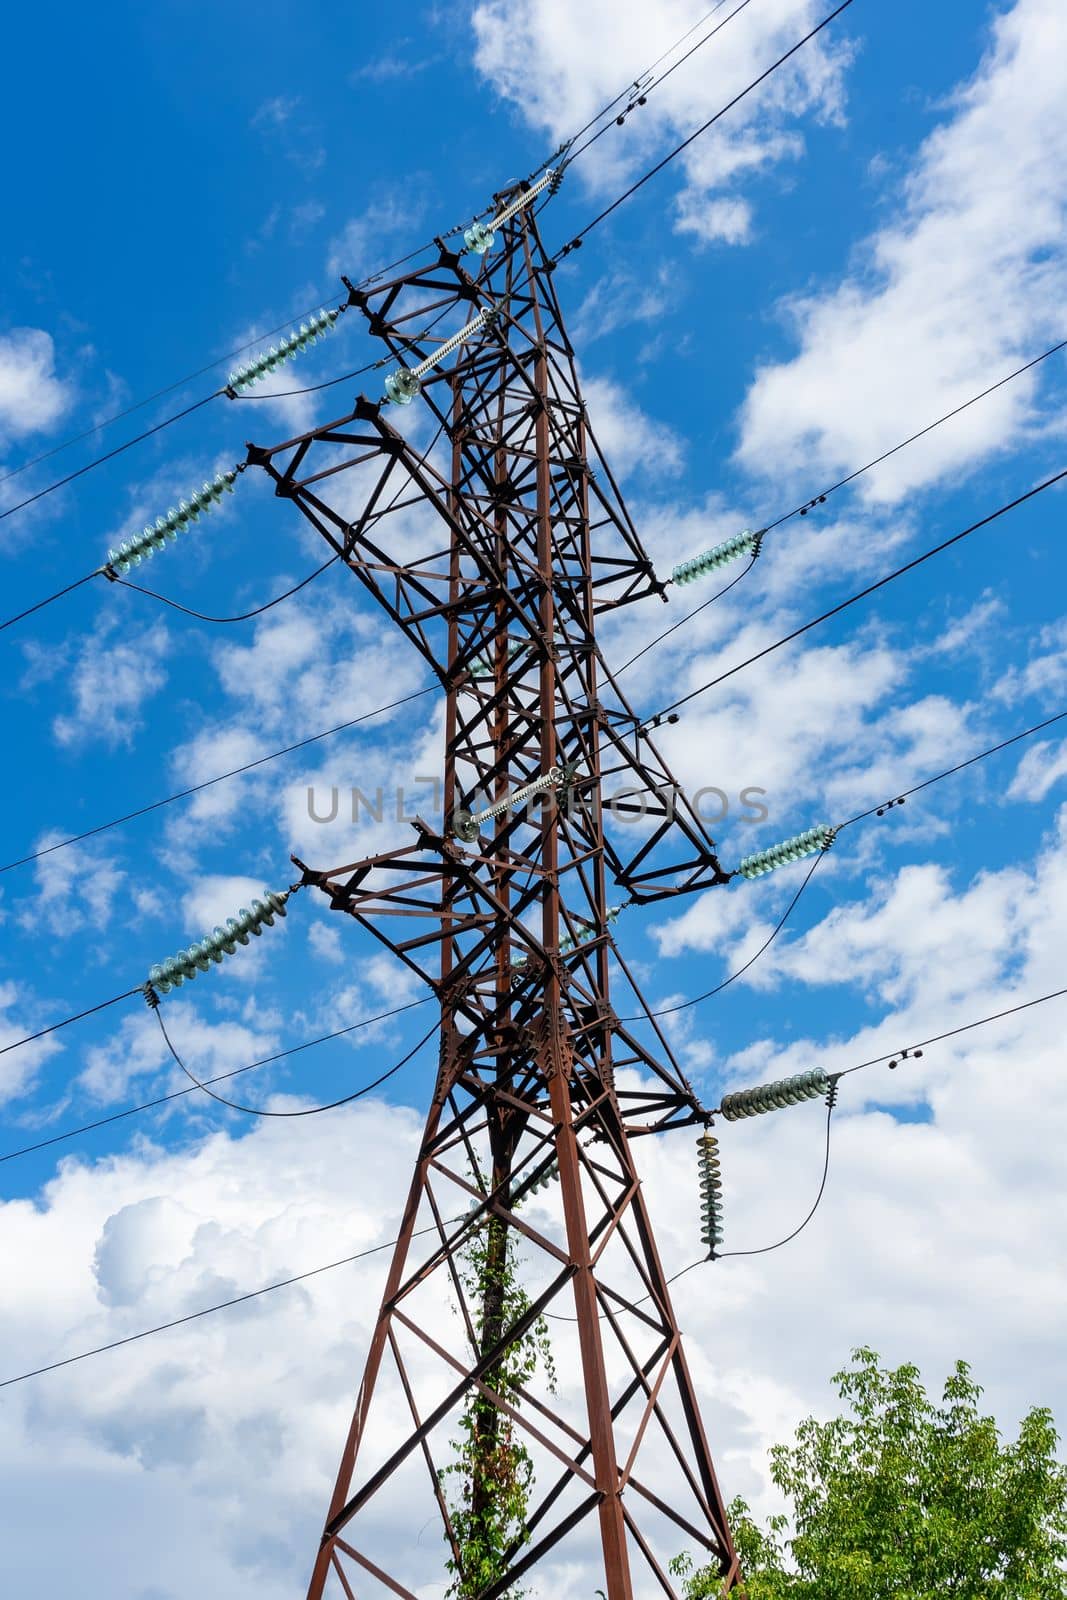 A pole of a high-voltage electric line on the background of a blue sky with white clouds.